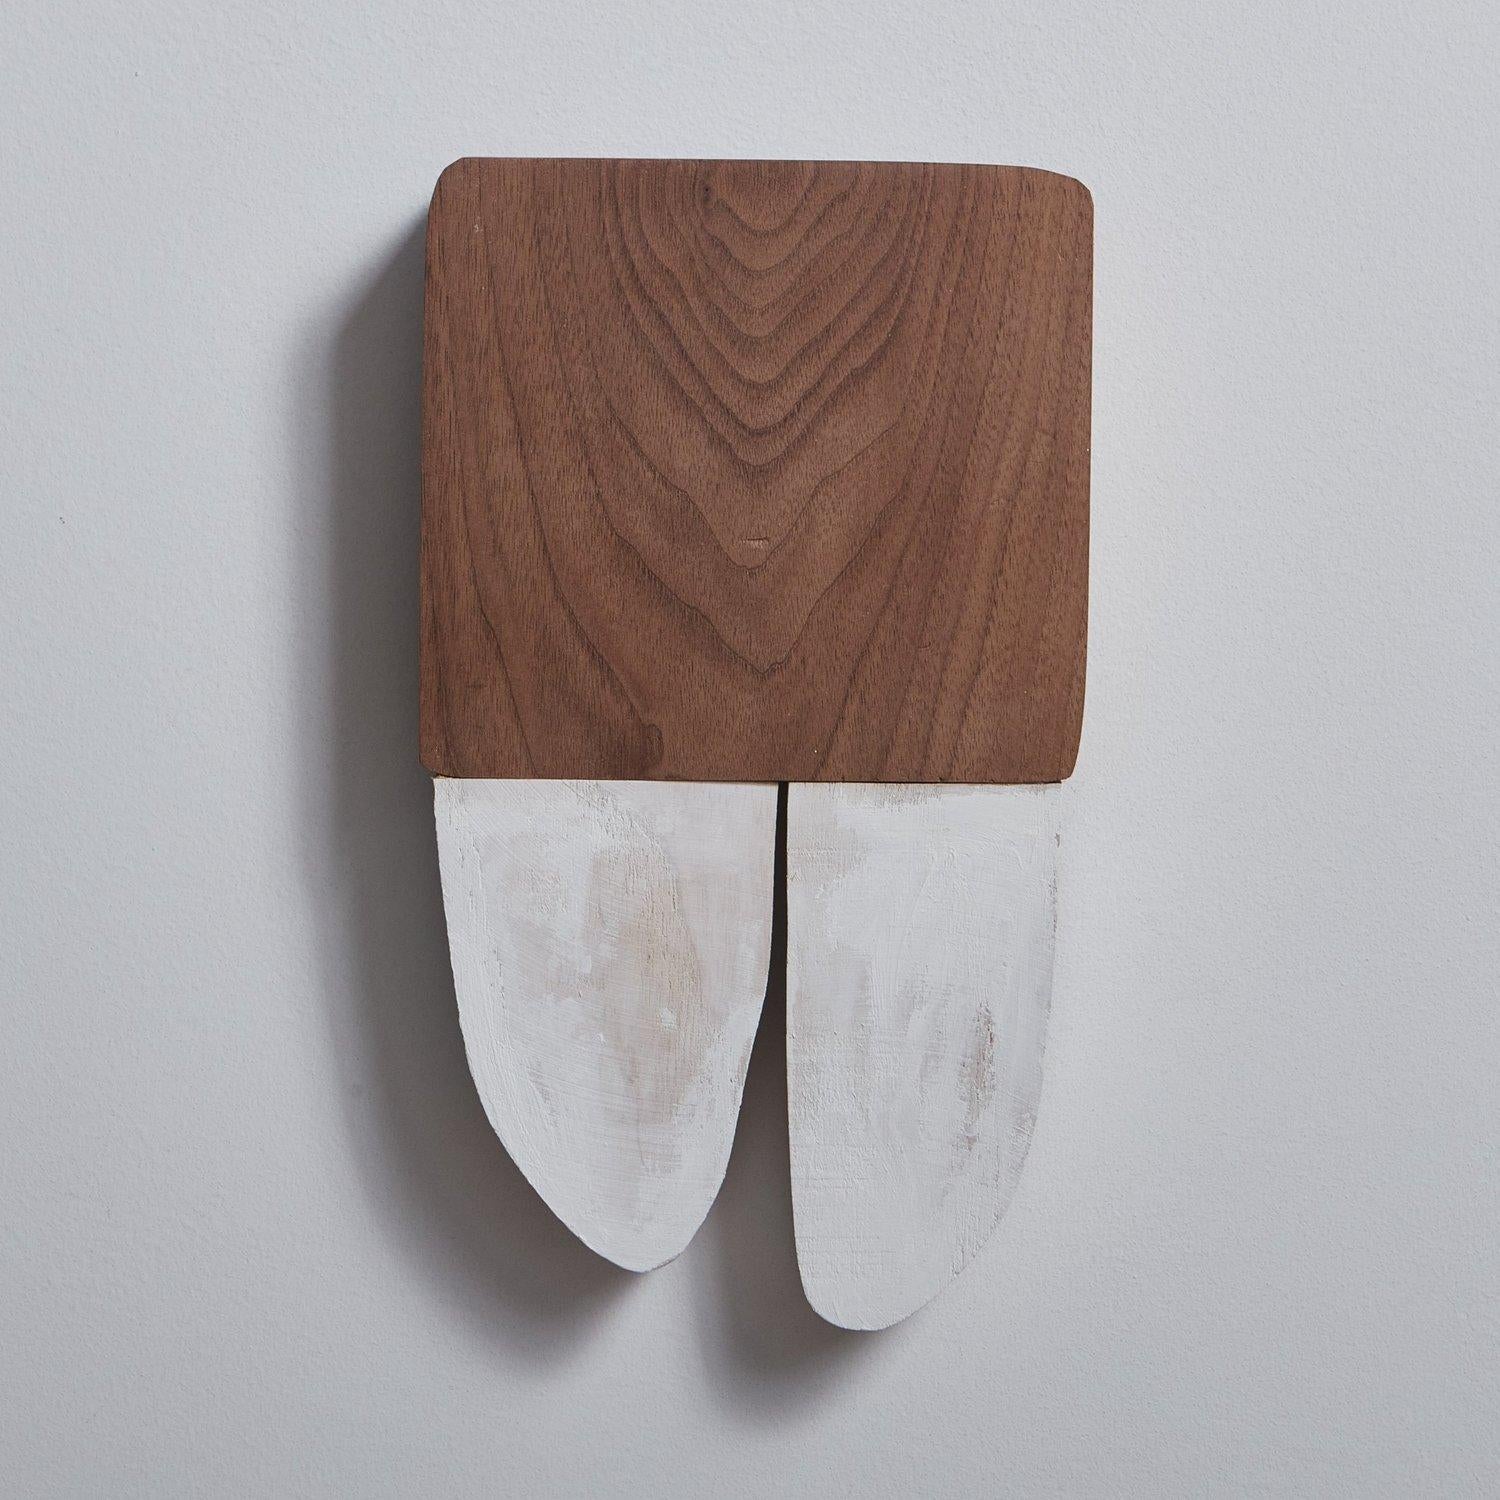 A textural wall sculpture hand carved from wood by Canadian artist Erin Vincent. This piece has a beautiful partial white painted finish and features gorgeous wood graining. Signed and dated en verso. Hanging hardware included.

Erin Vincent is a